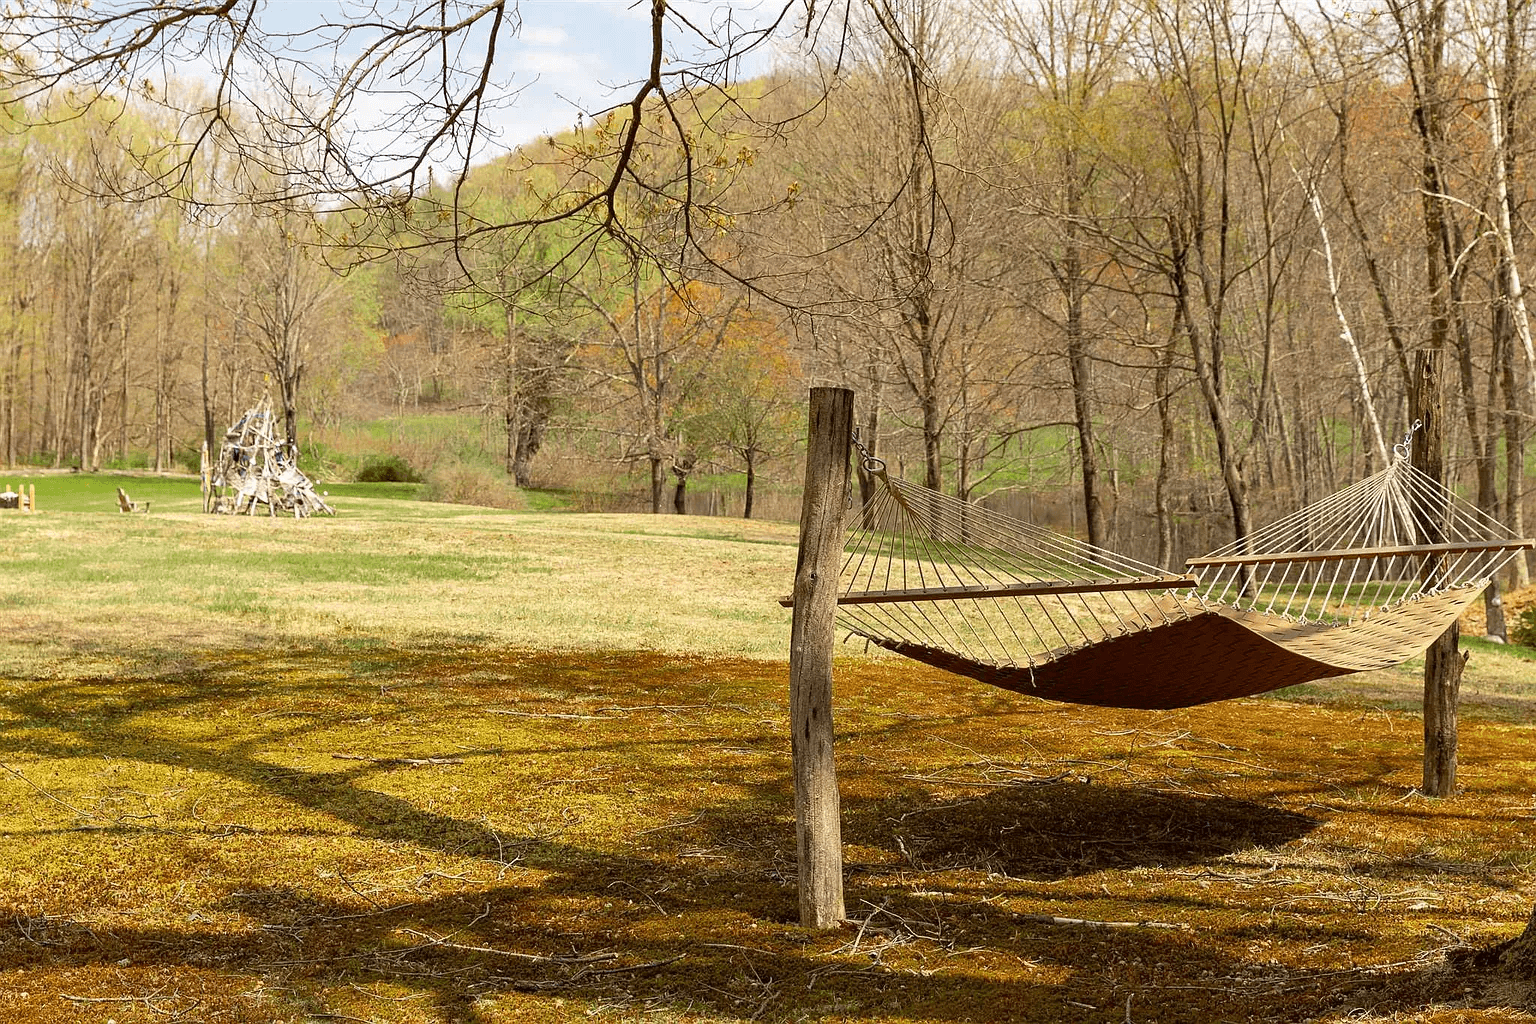 view of hammock with fire pit in the distance